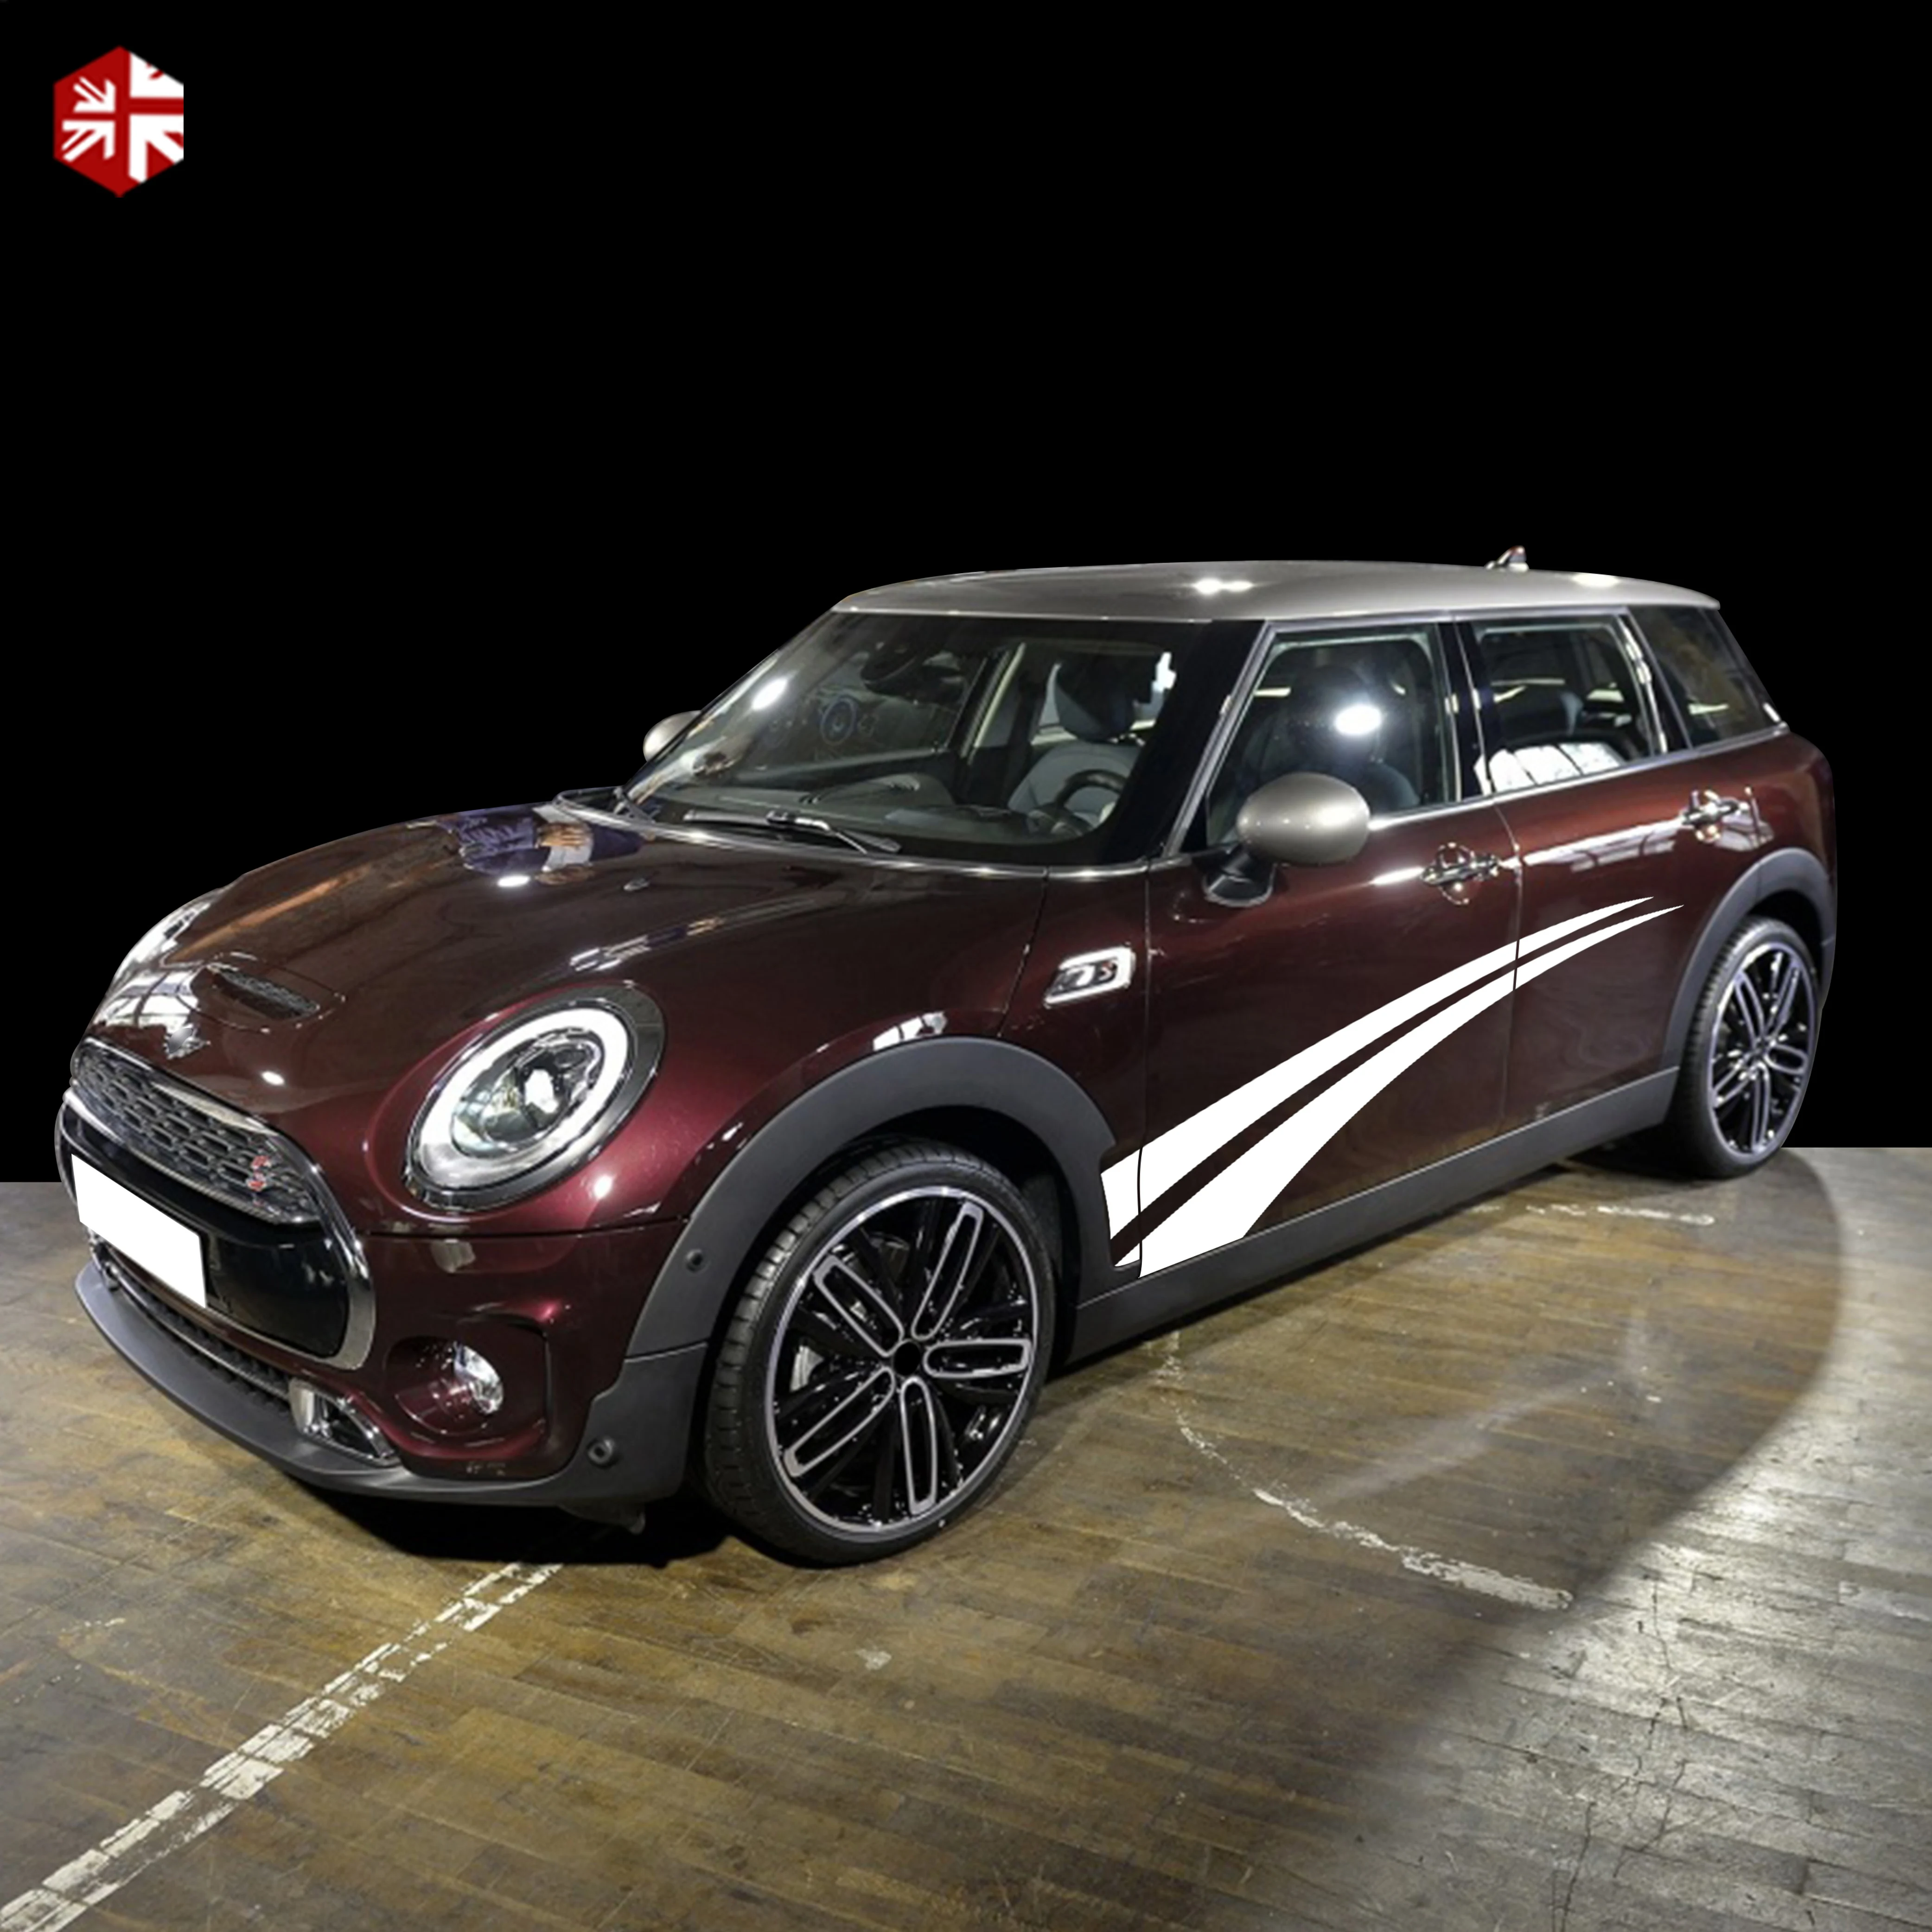 2X Creative Vinyl Car Styling Door Side Stripes Sticker Graphics Body Decal For MINI Cooper S Clubman F54 One JCW Accessories